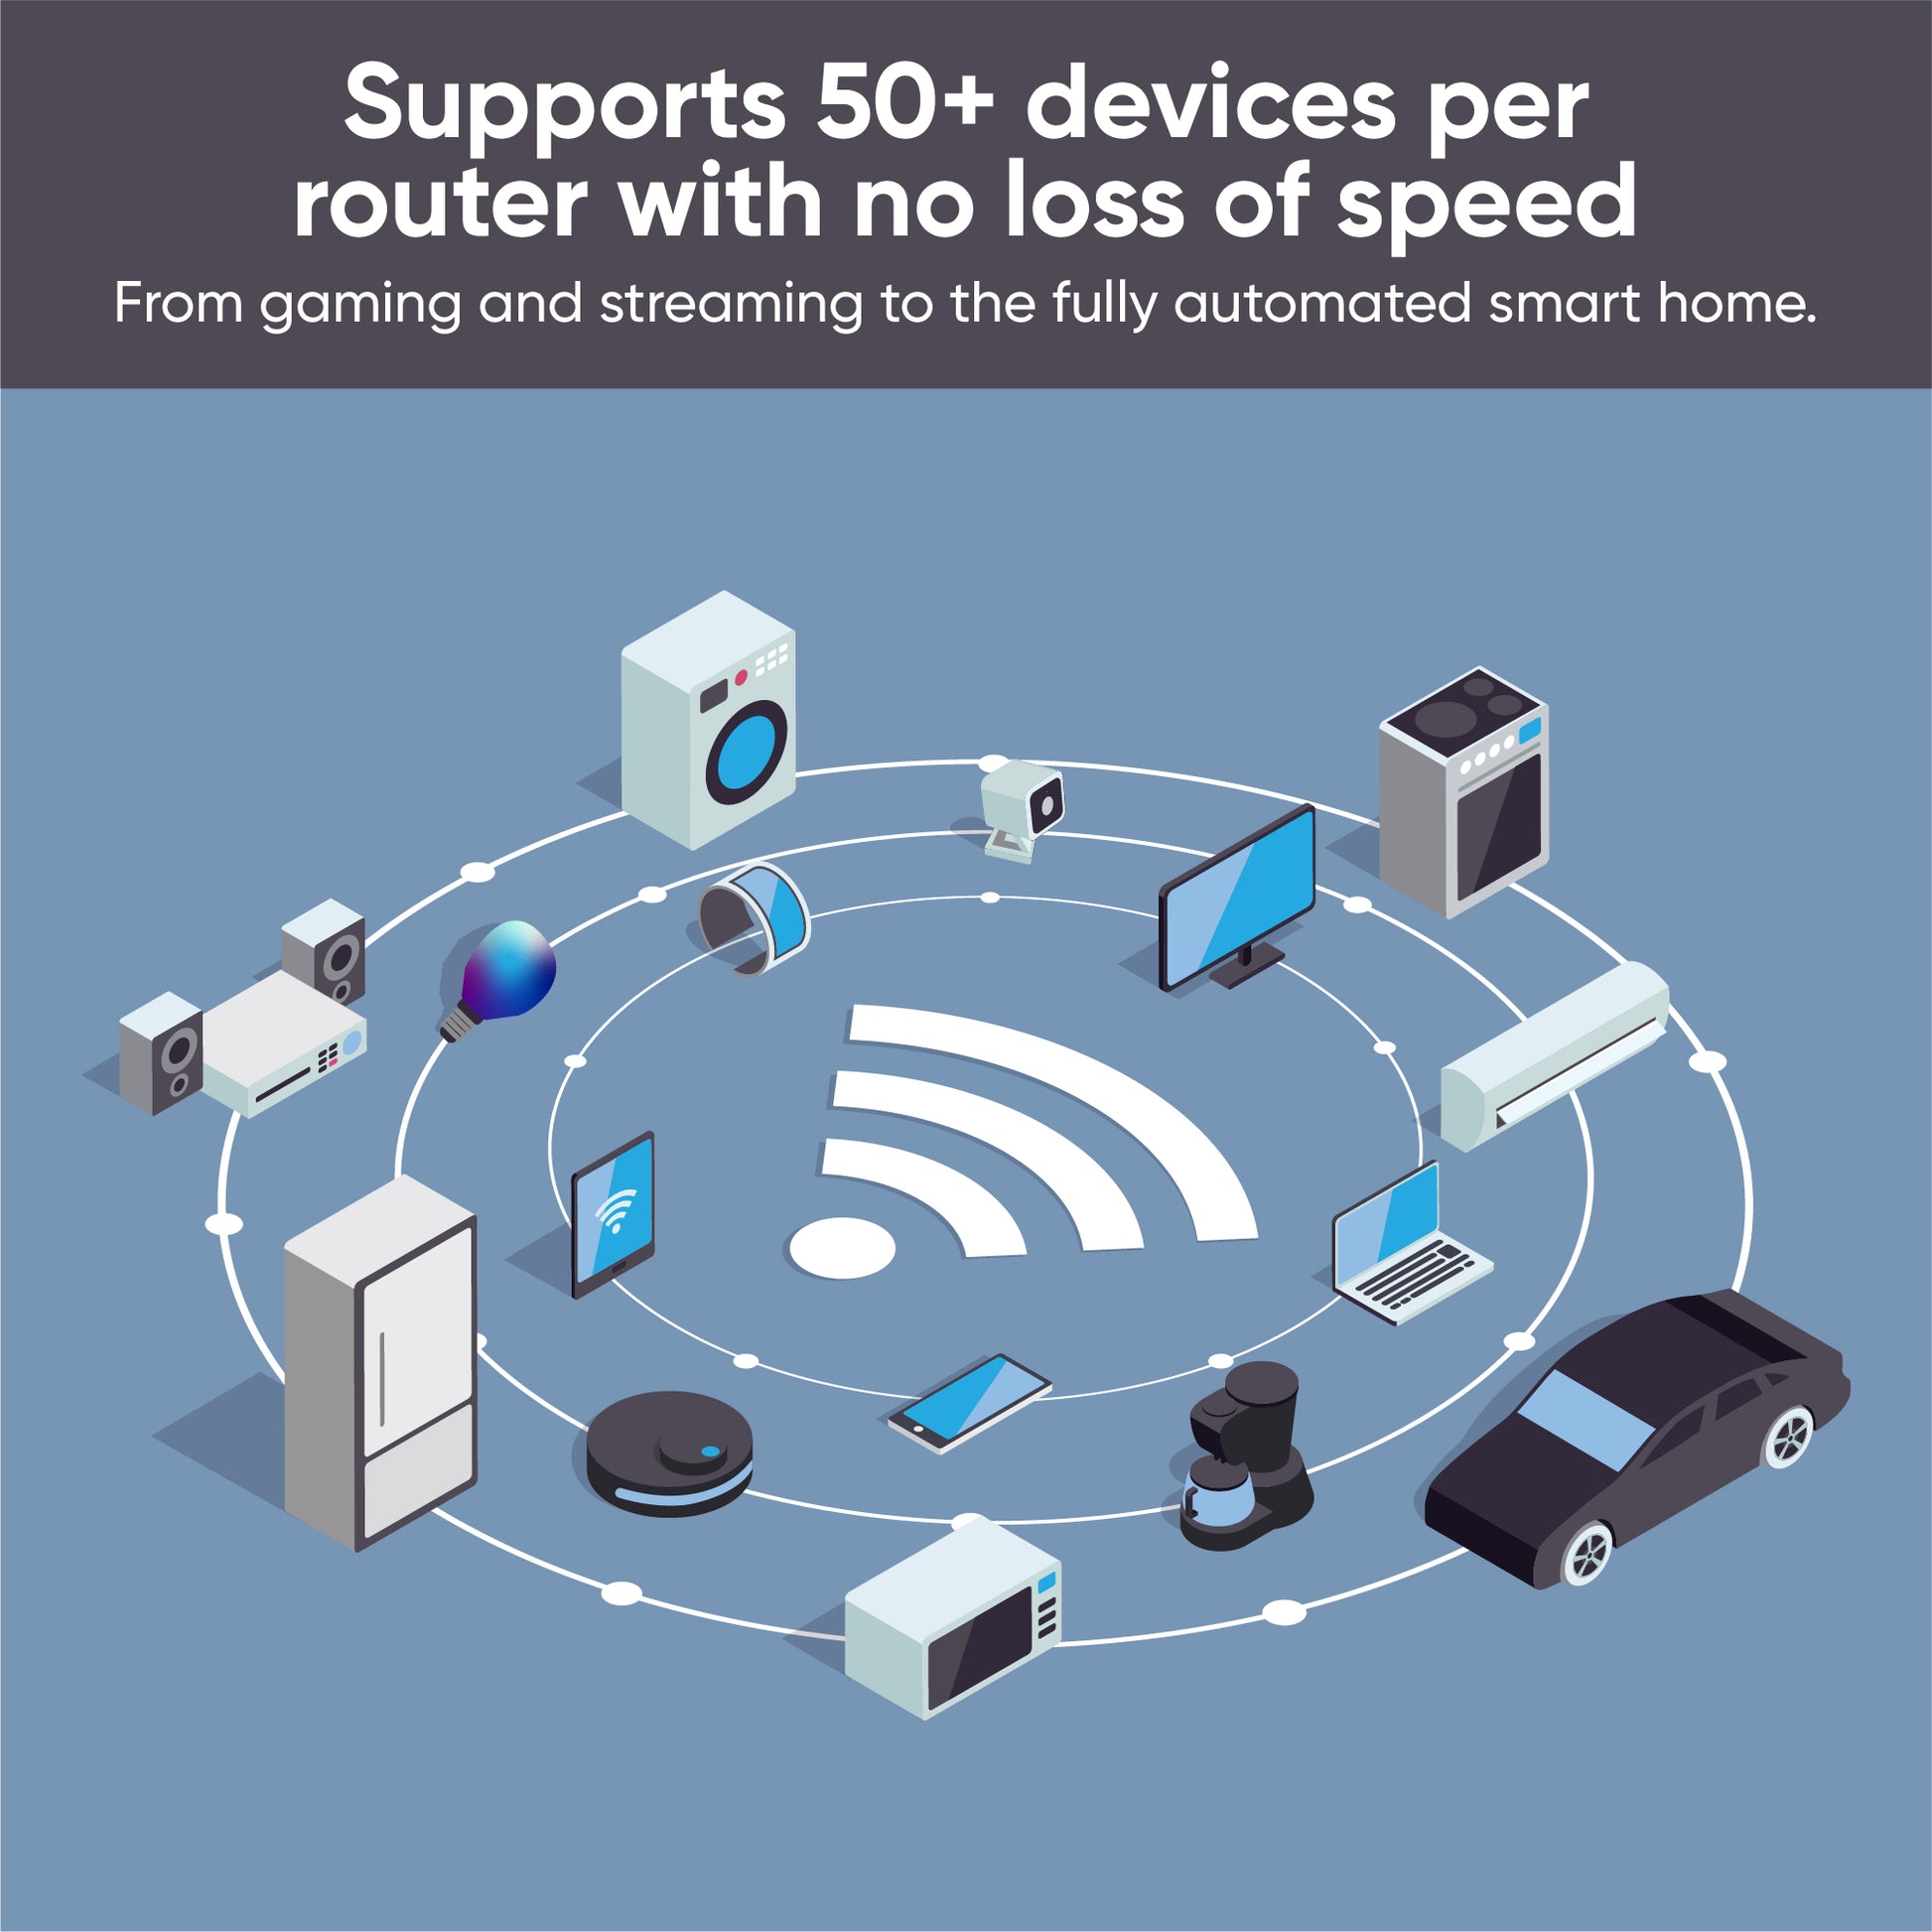 wireless networking - Any Phone Adapter for Router/Modem? - Super User